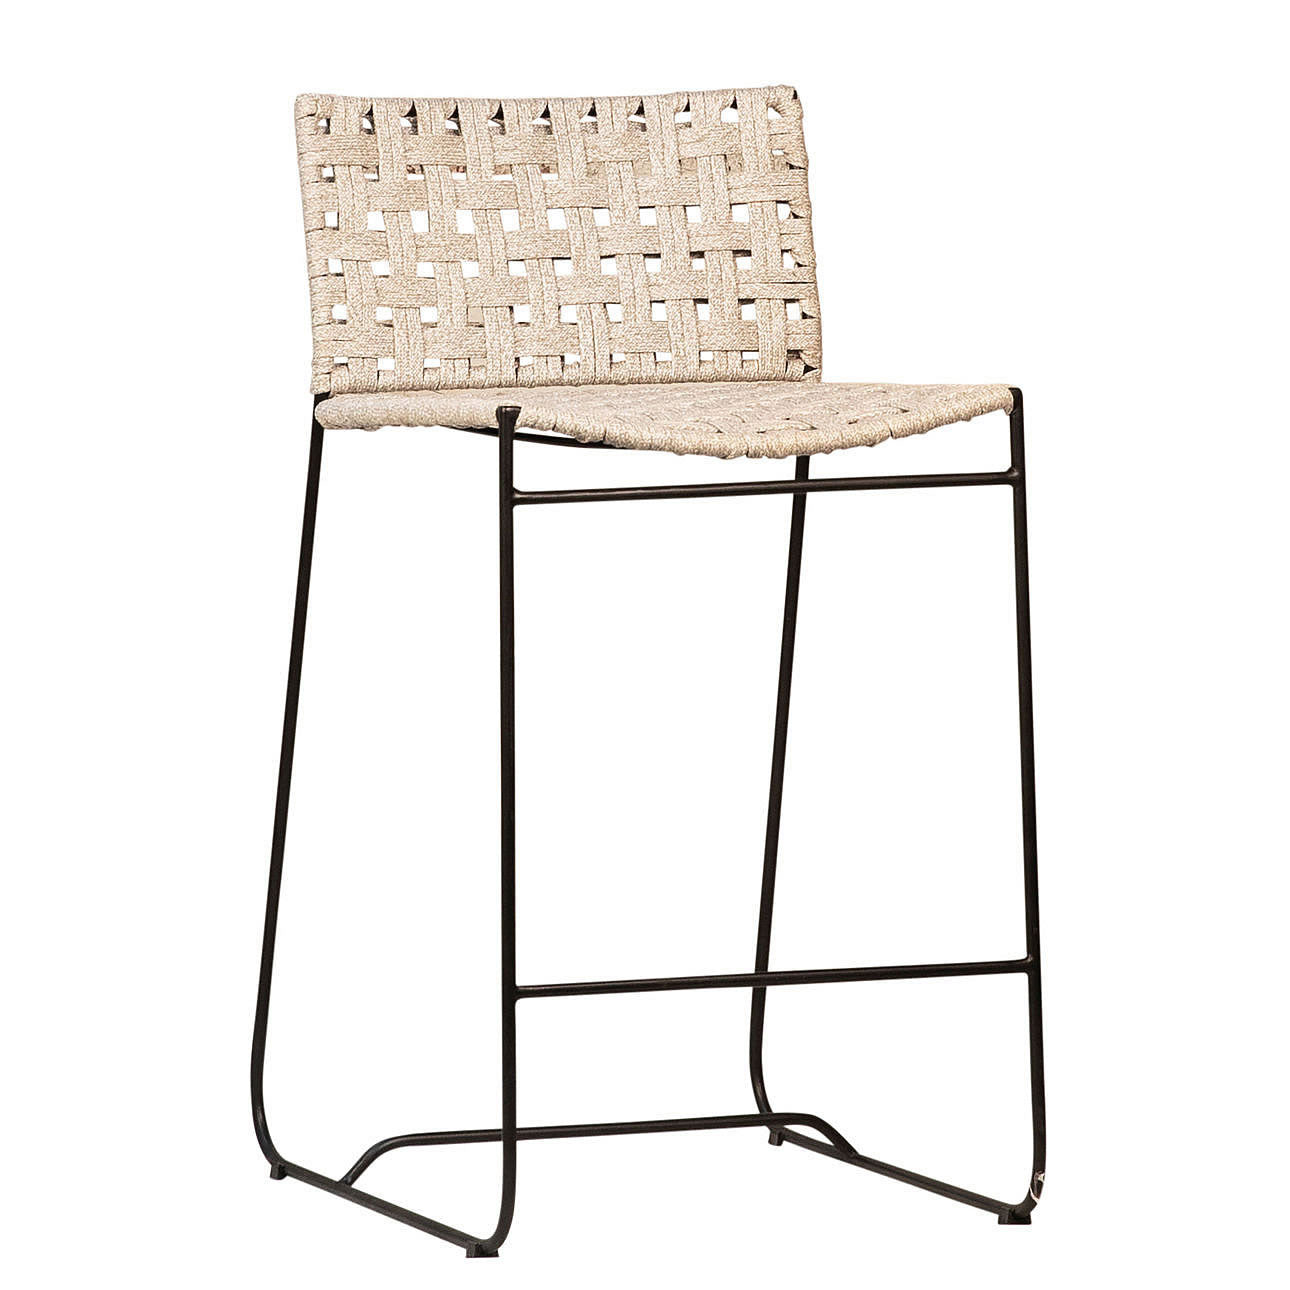 Ezra Outdoor Counter Stools in Natural Rope & Black Powder Coated Legs PAIR Hollywood